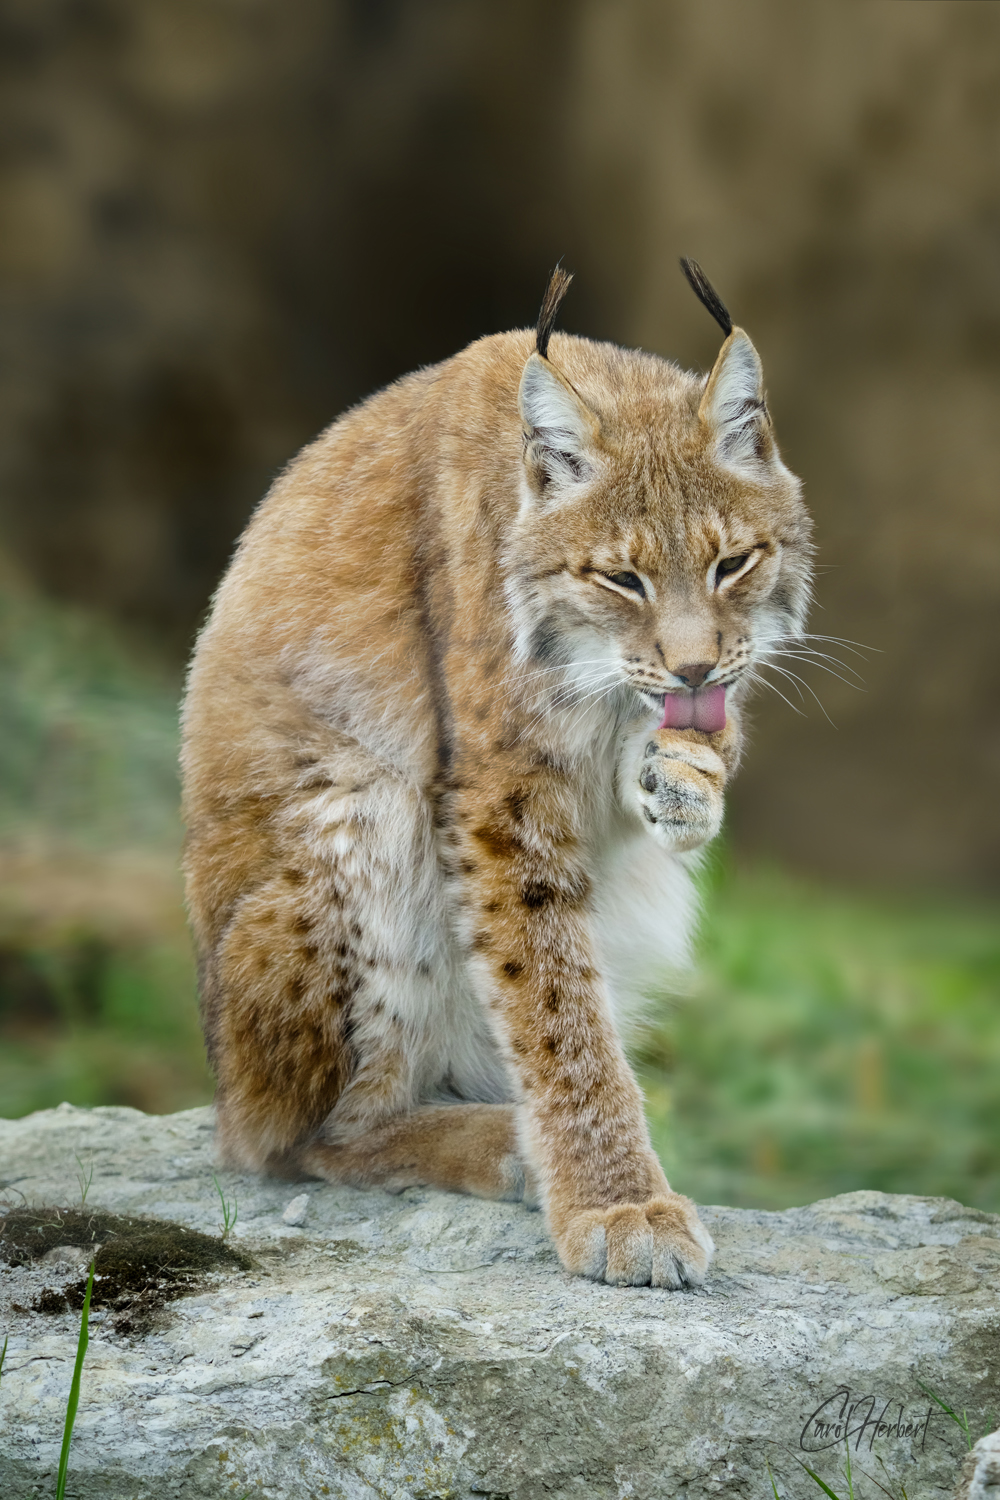 A Siberian Lynx licking its paw